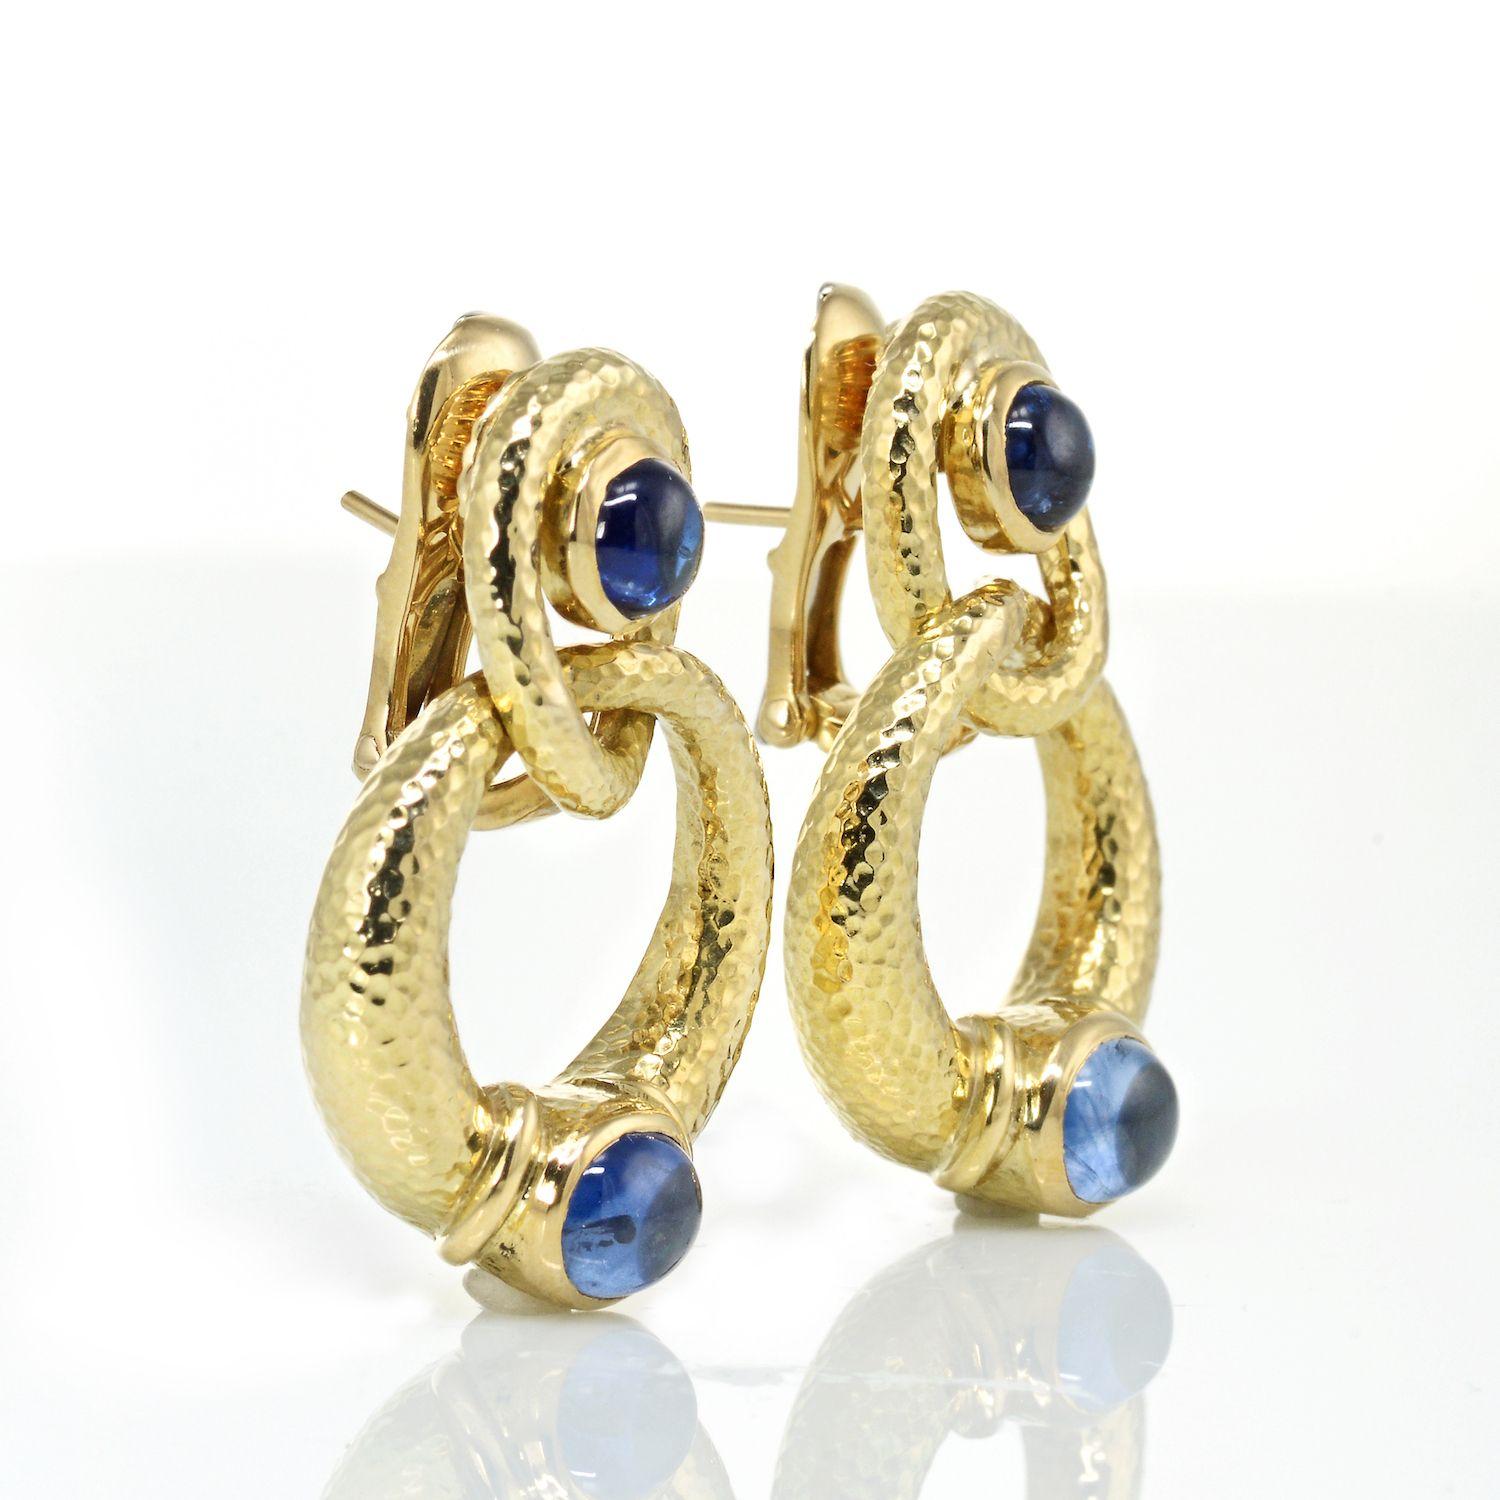 Hammered 18K yellow gold David Webb doorknocker clip-on earrings featuring cabochon sapphires. Gemstones are bezel set and are with no signs of wear. For pierced ears. 
Length: 1.25 inches appr.
